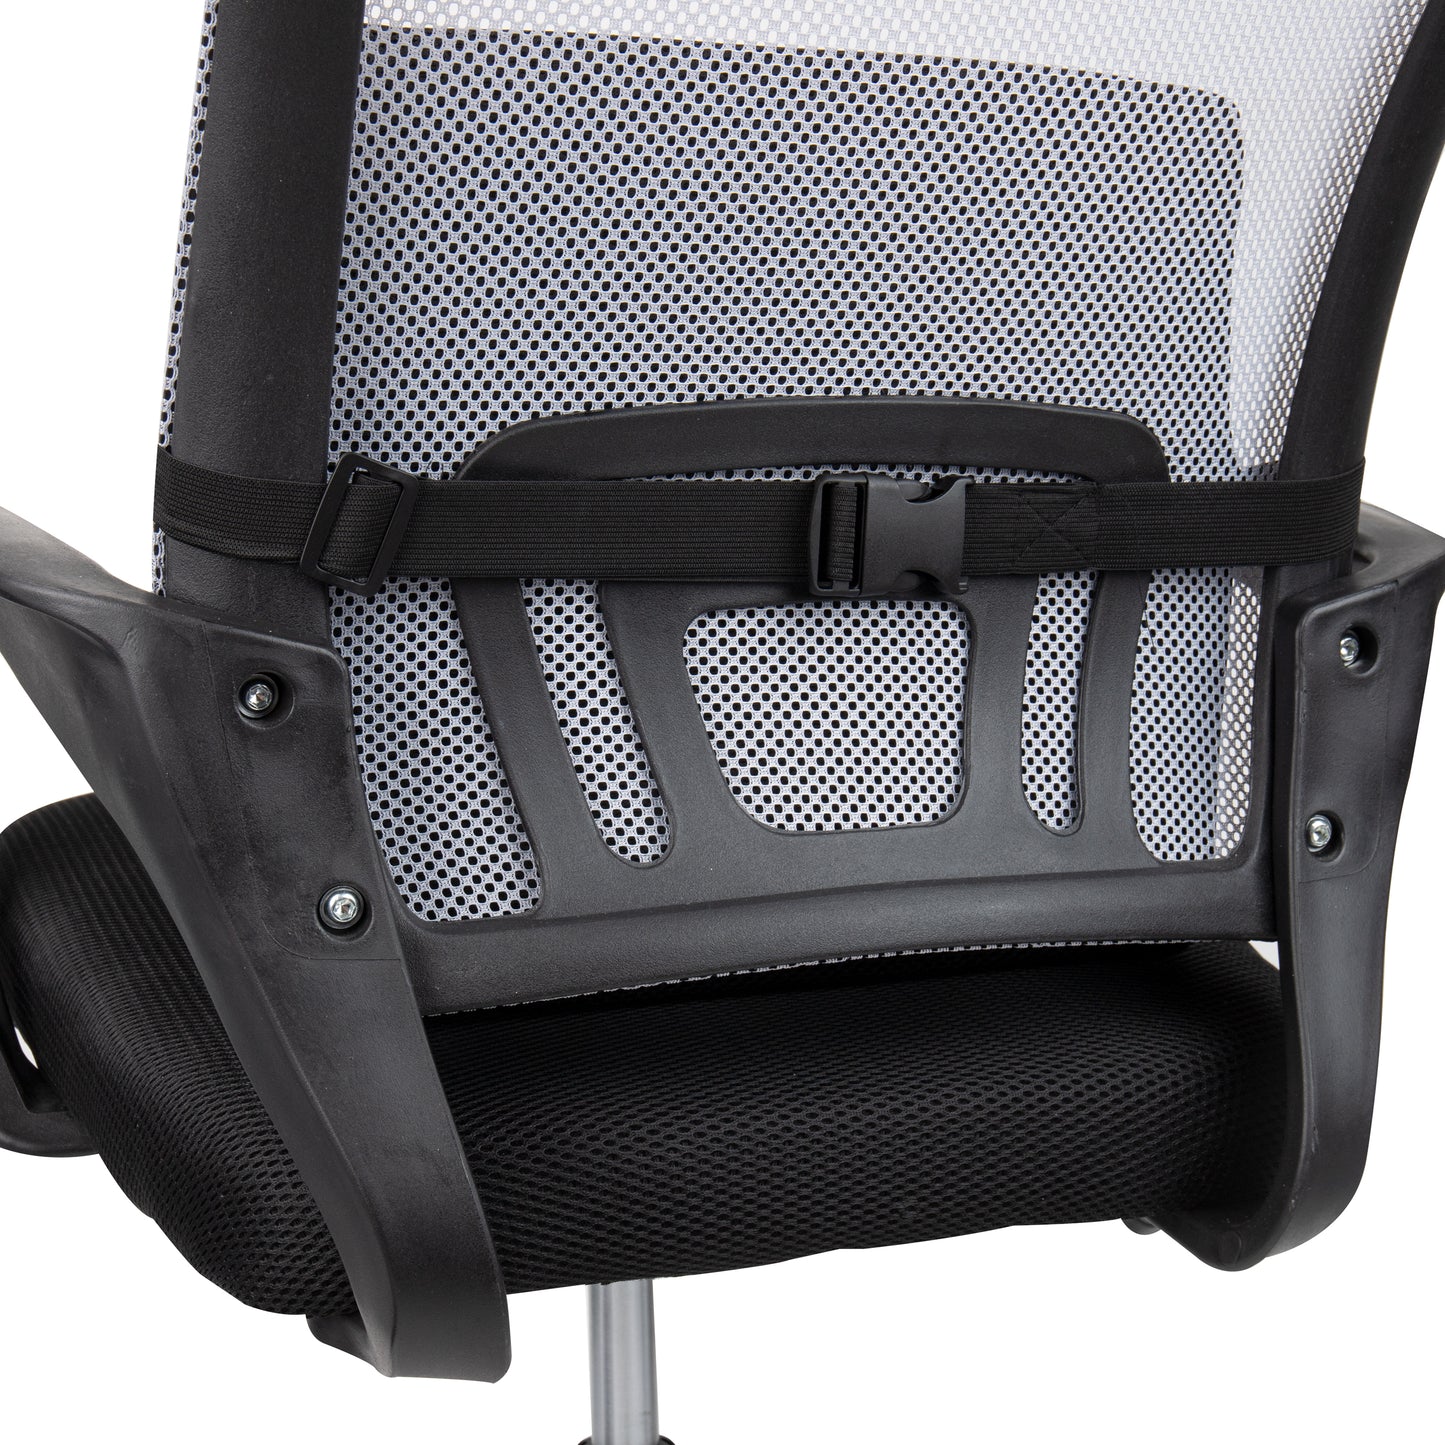 Mind Reader Harmony Collection, Ergonomic Back and Footrest Set, Memory Foam Support, Lower Back Cushion Attaches to Office Chair, Fabric Mesh Surface, Lower Back Pressure Relief, Black